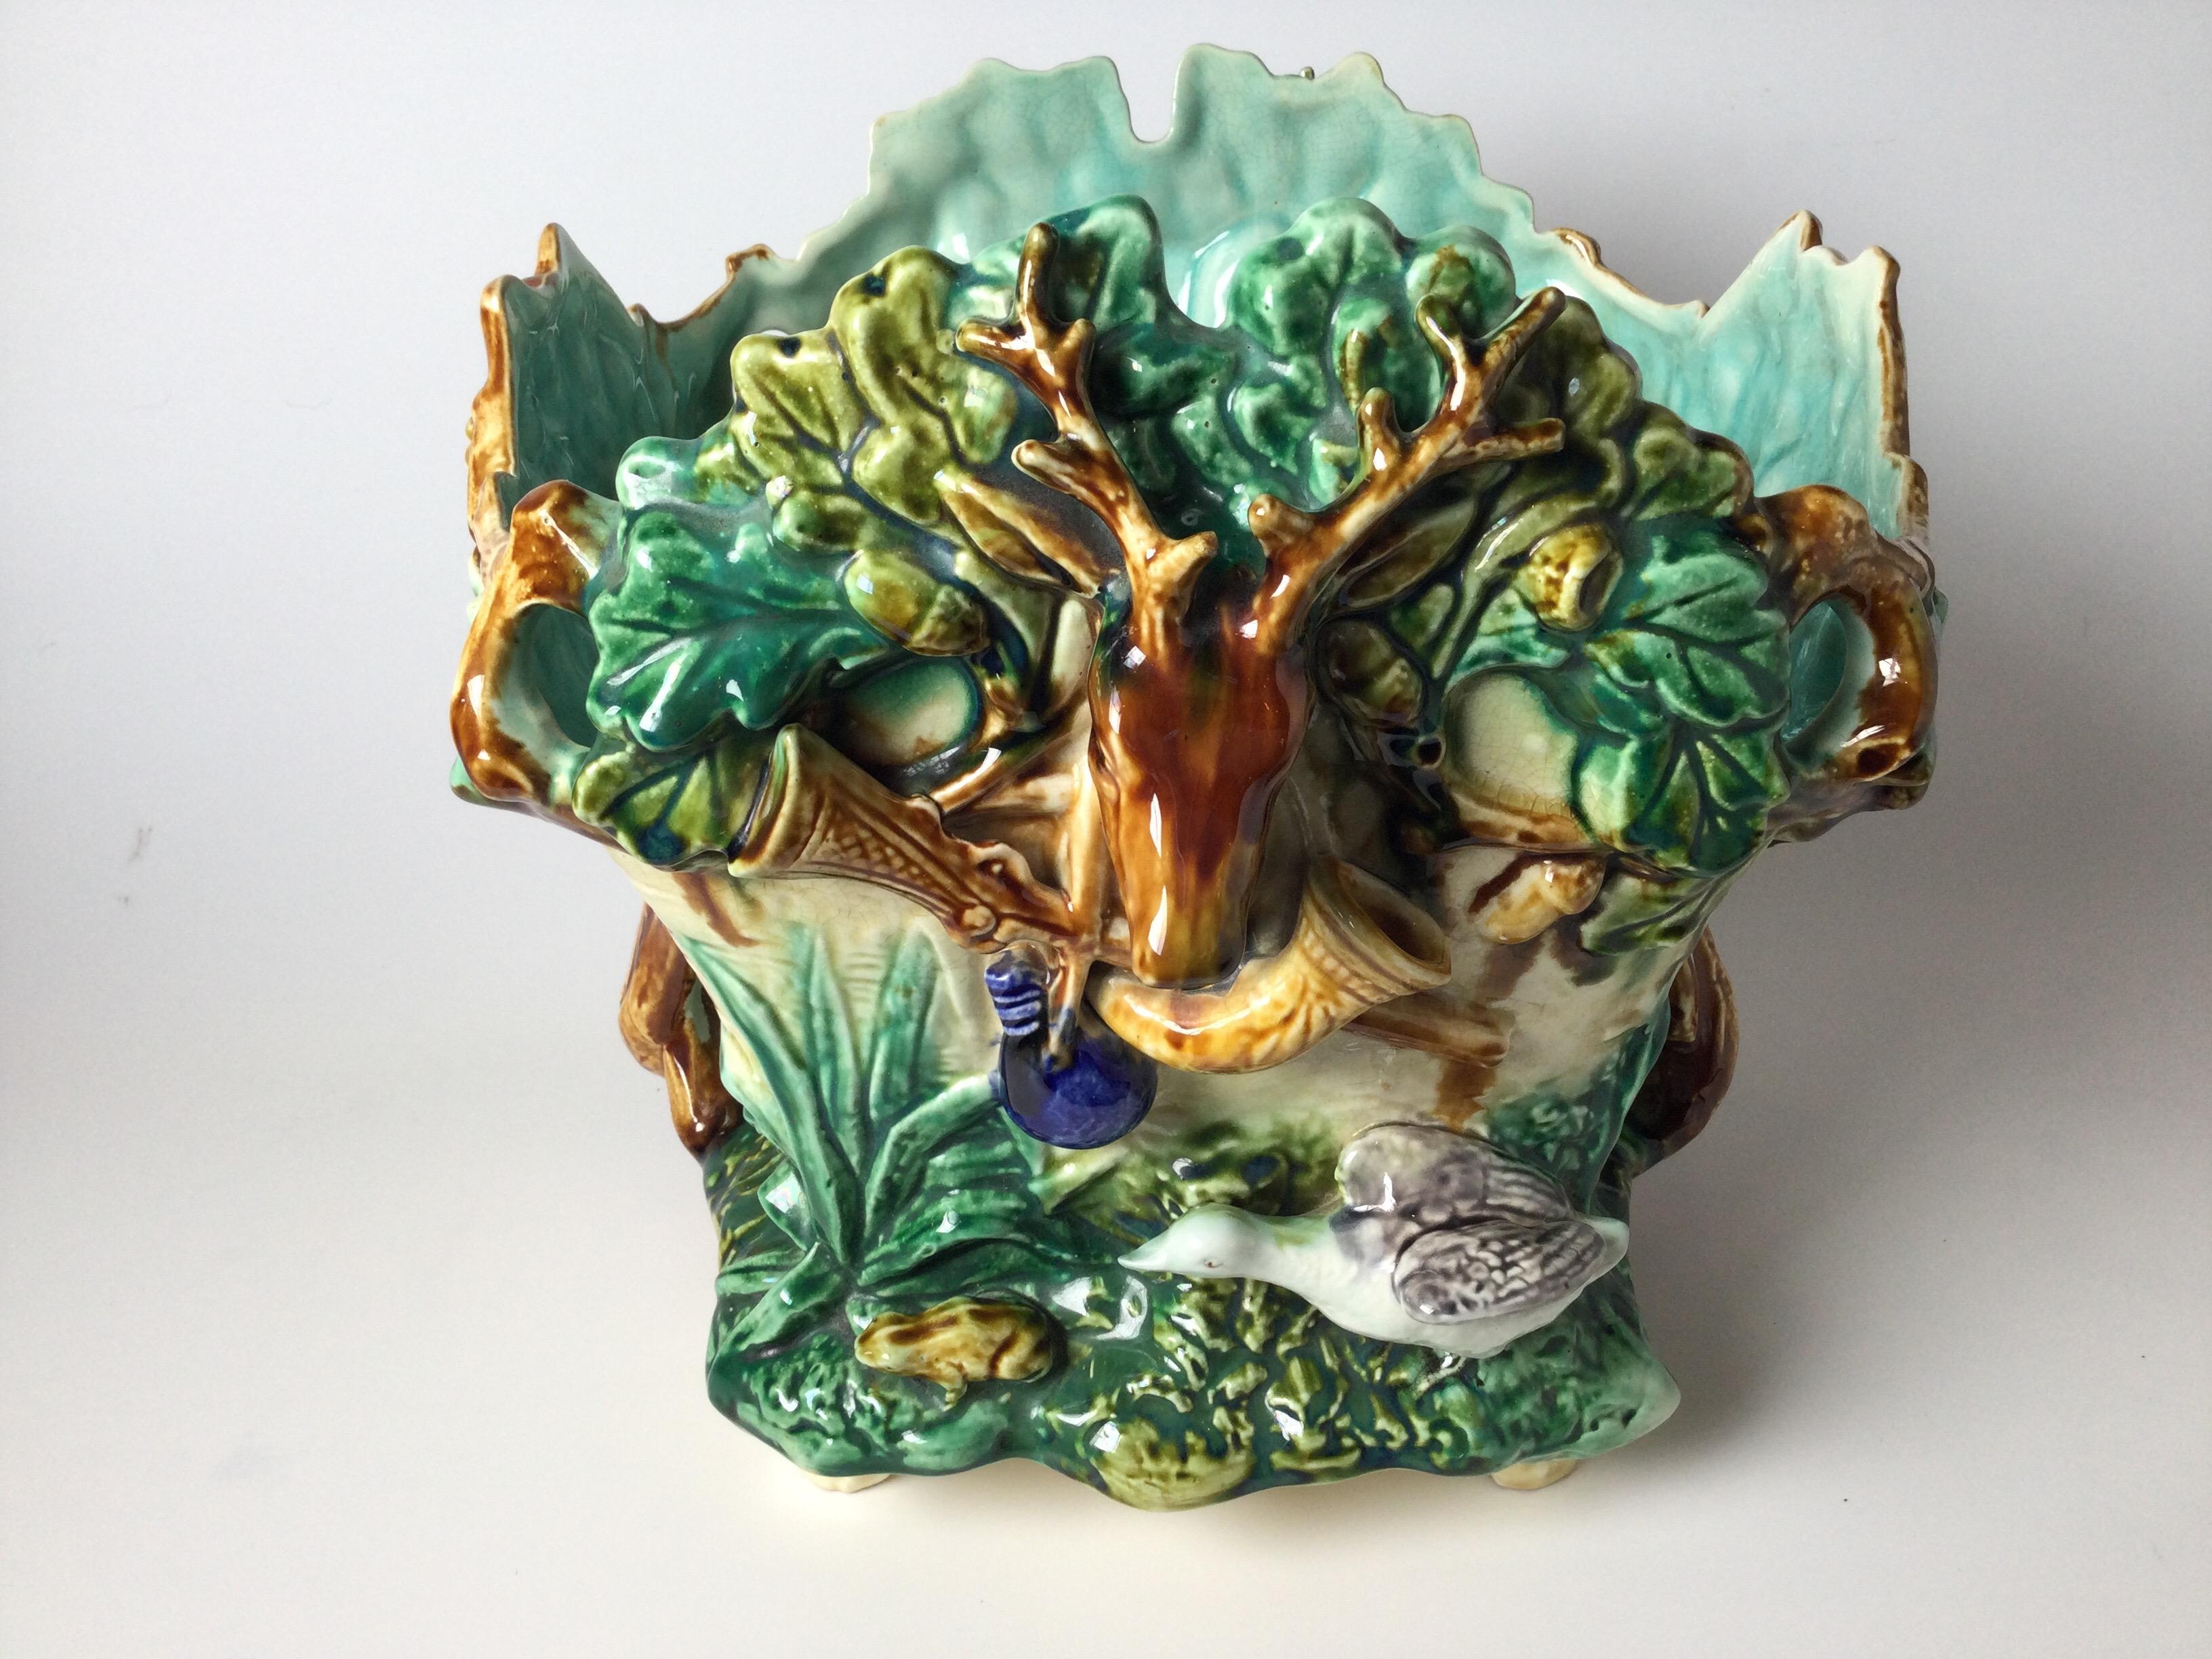 Vibrant antique jardinière with leaves and branches with a stag at the fron, late 19th century France.